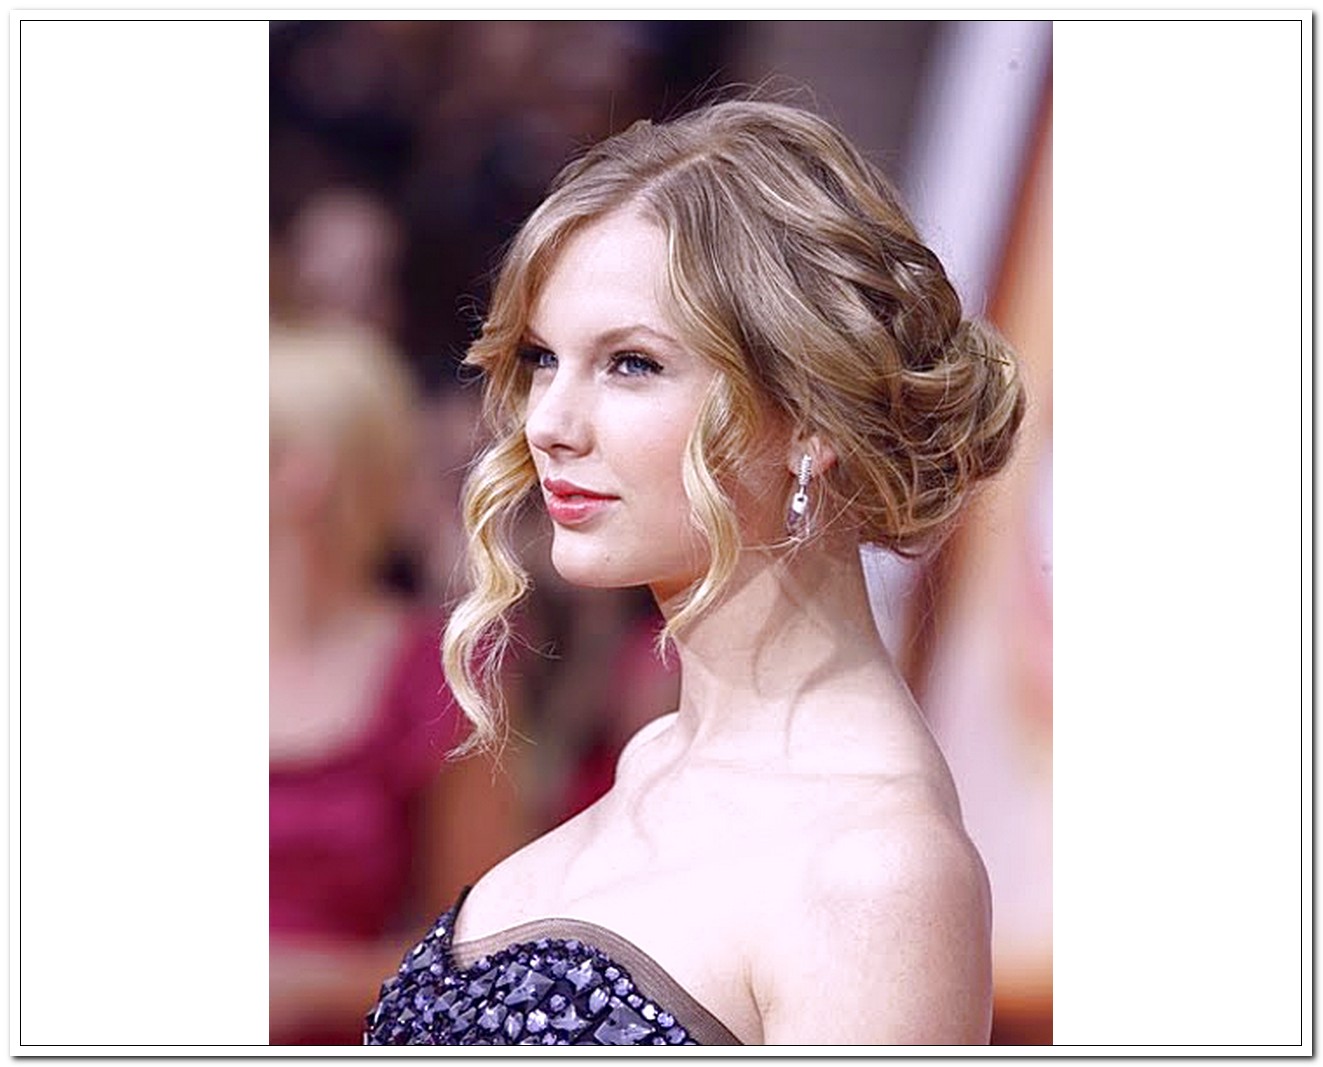 Hairstyles For Celebrity, Celebrity Hair Styles, celebrity Hairstyles, Celebrity Hair